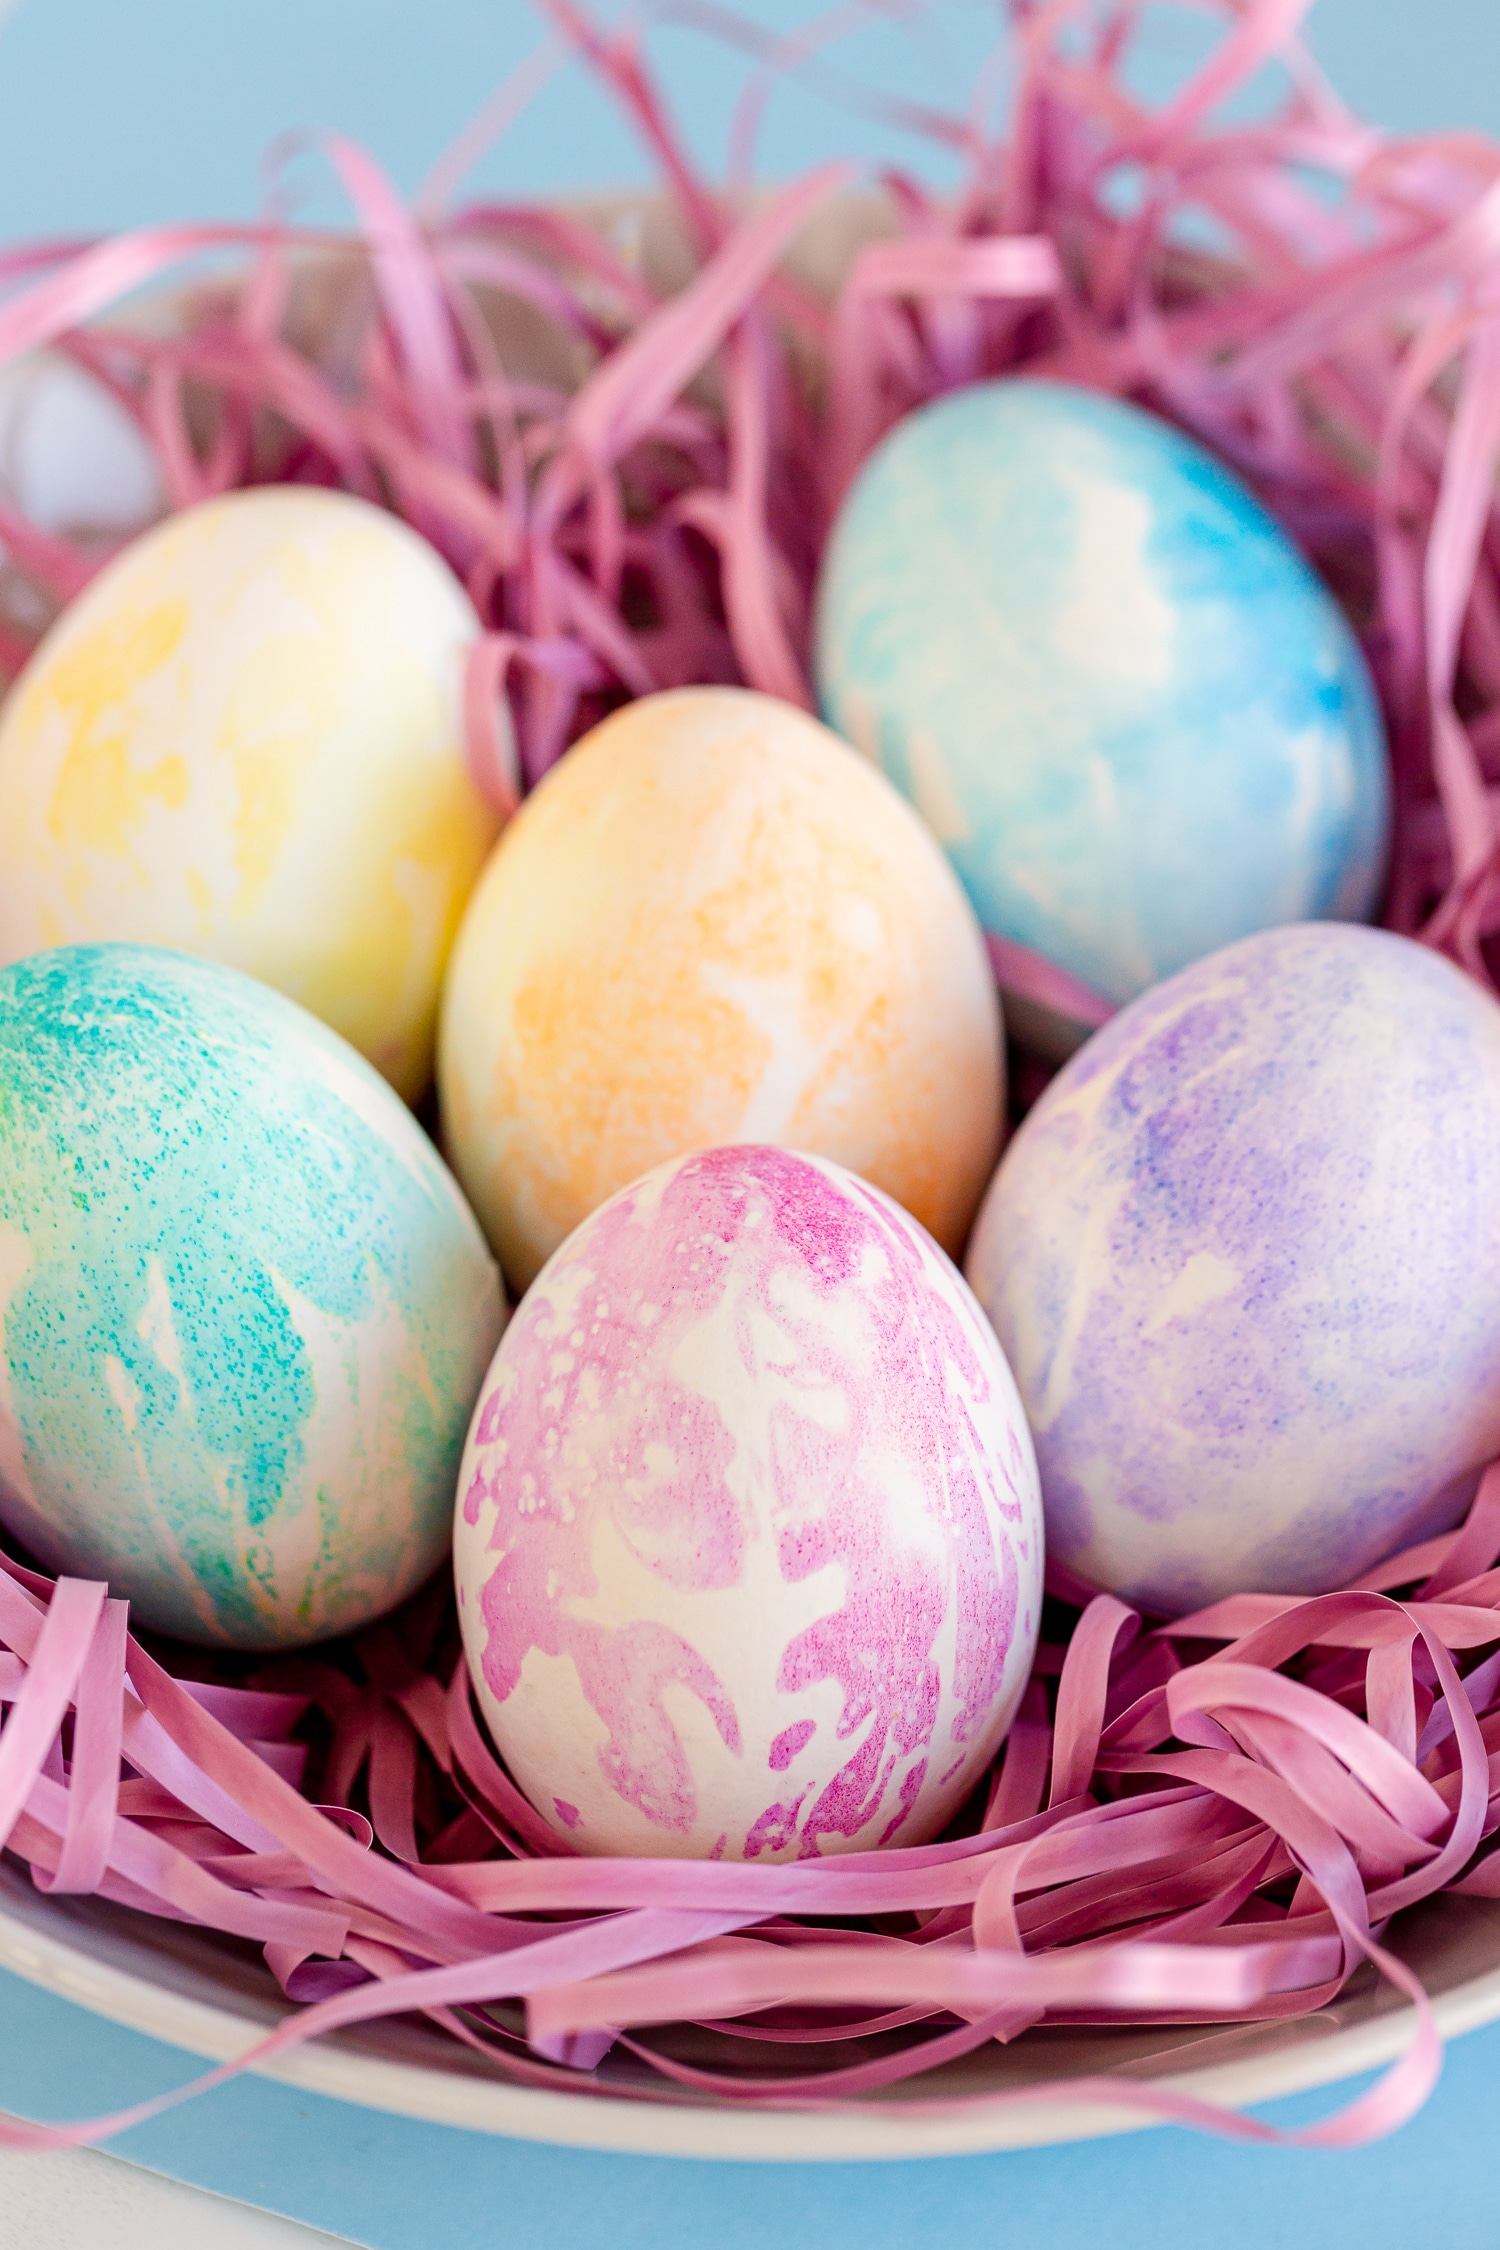 These Tie Dye Easter Eggs are a mess free fun Easter activity using markers and coffee filters! No vinegar or dyes needed!